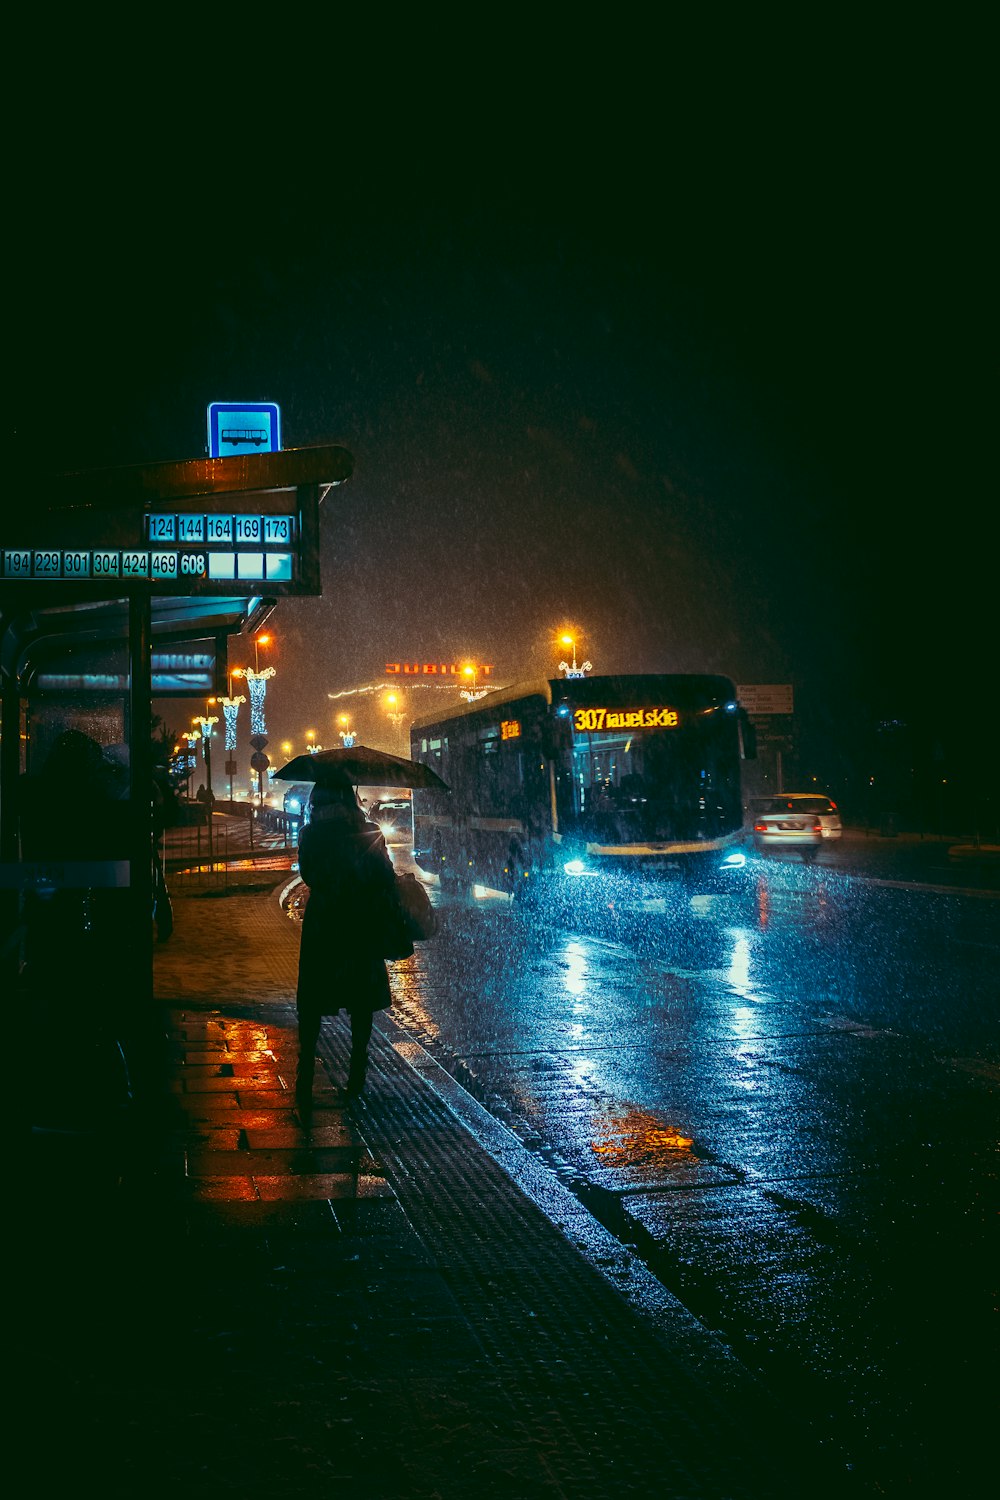 a person holding an umbrella on a rainy night